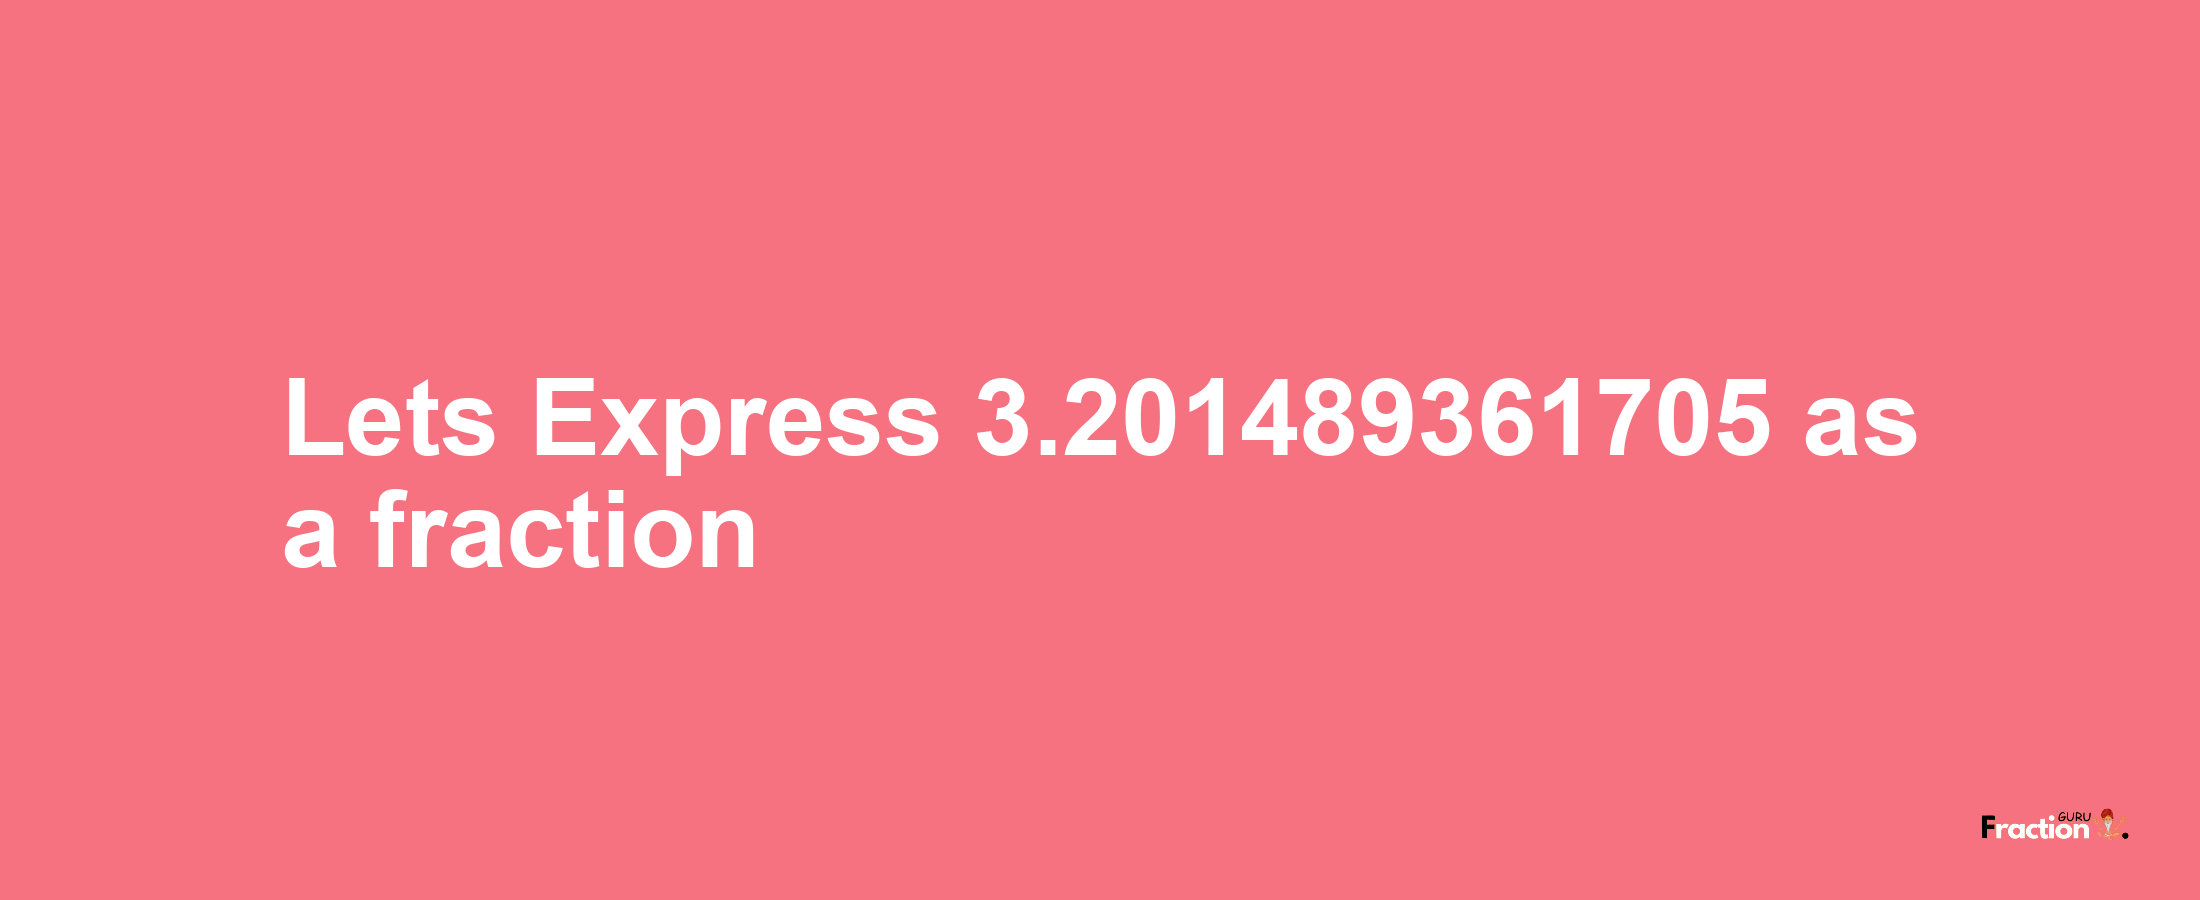 Lets Express 3.201489361705 as afraction